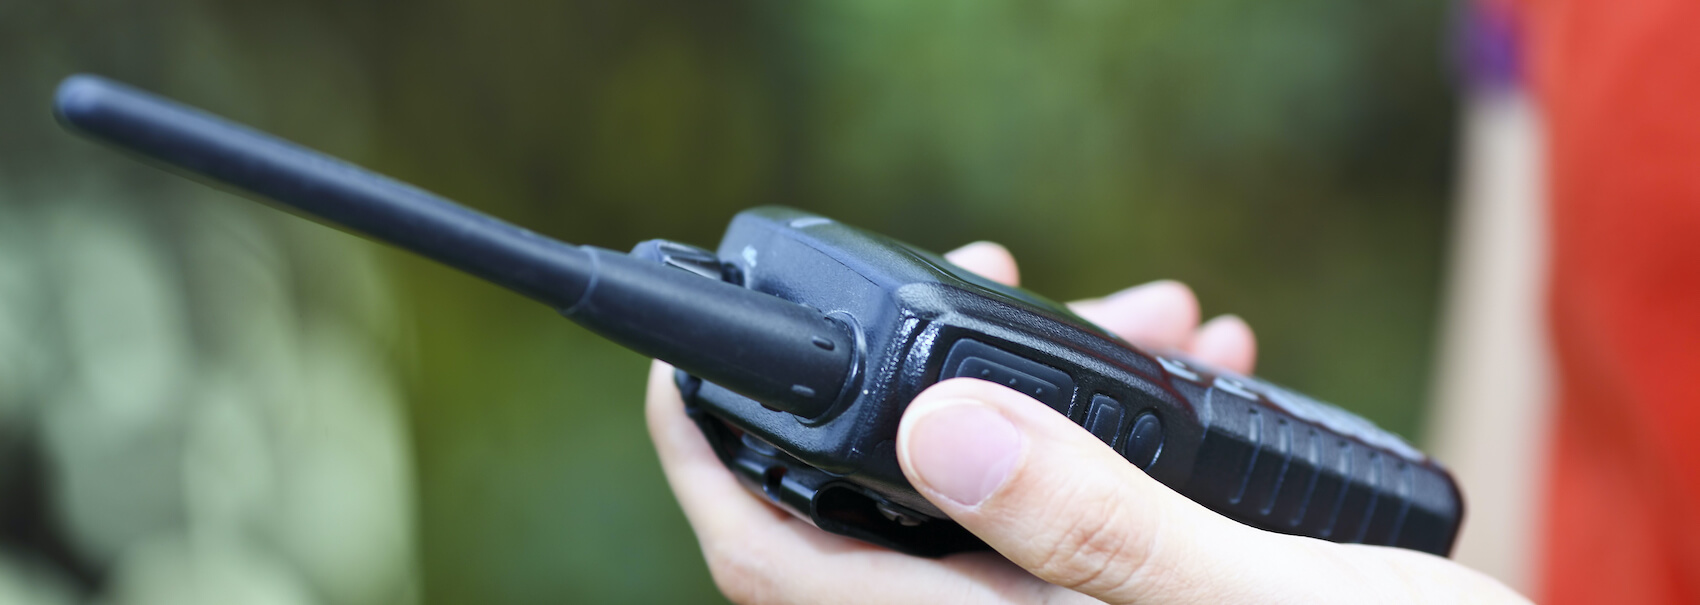 Two-Way Radios for Sale near Kennett Square